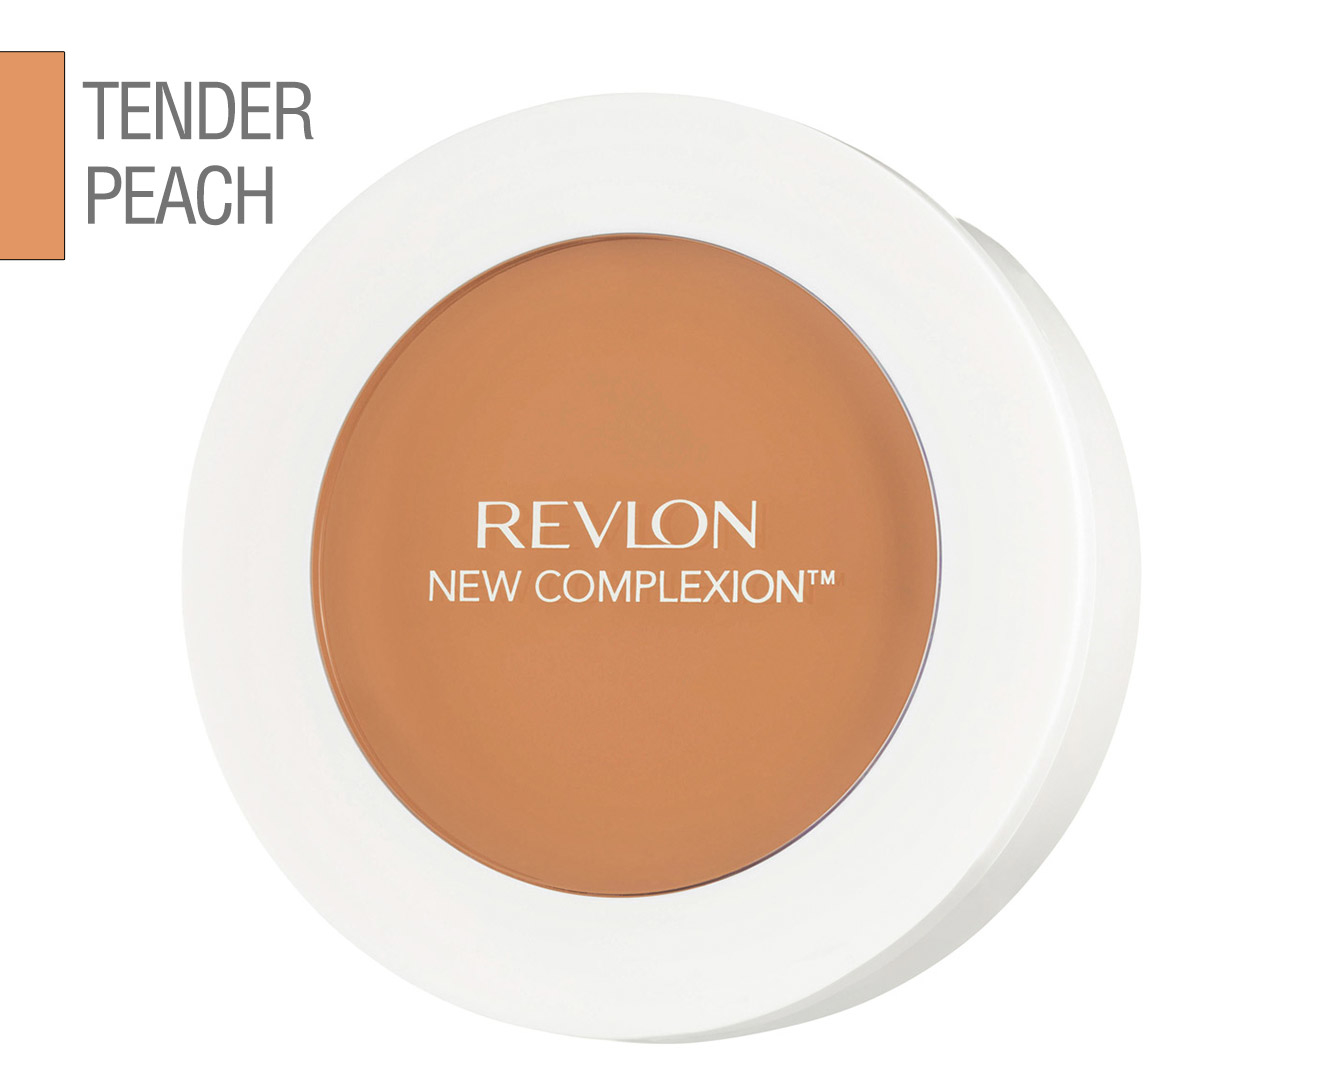 Revlon New Complexion One Step Compact Makeup 99g Tender Peach 